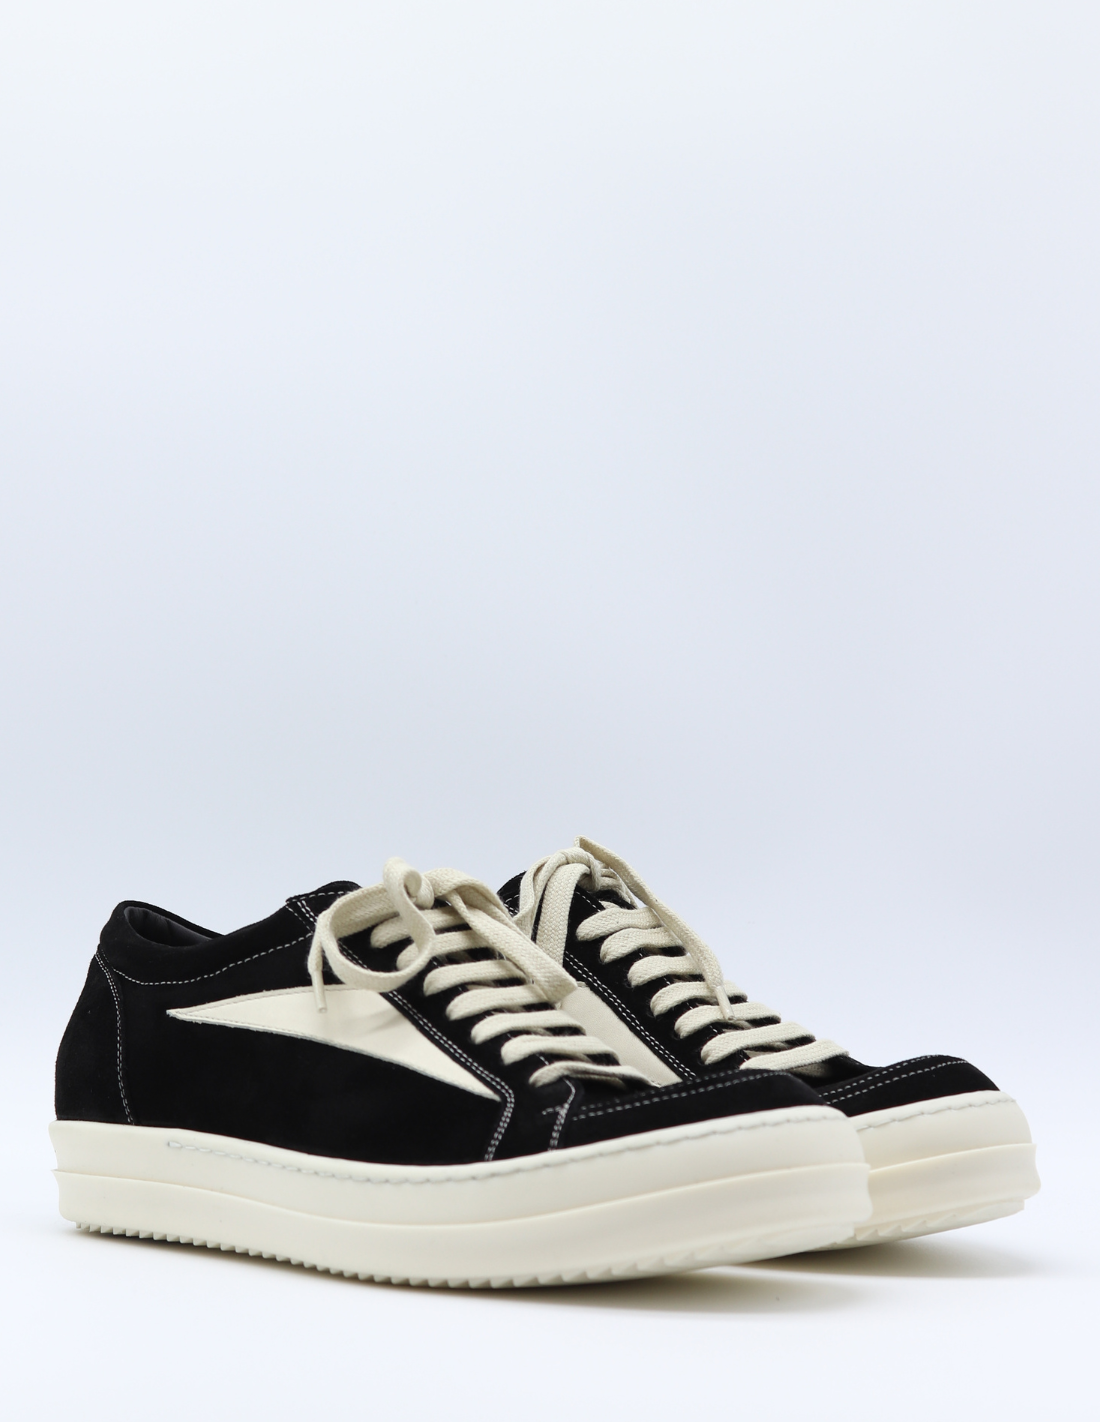 dø Resignation kan opfattes RICK OWENS "Vintage" two-tone low top sneakers in suede - black